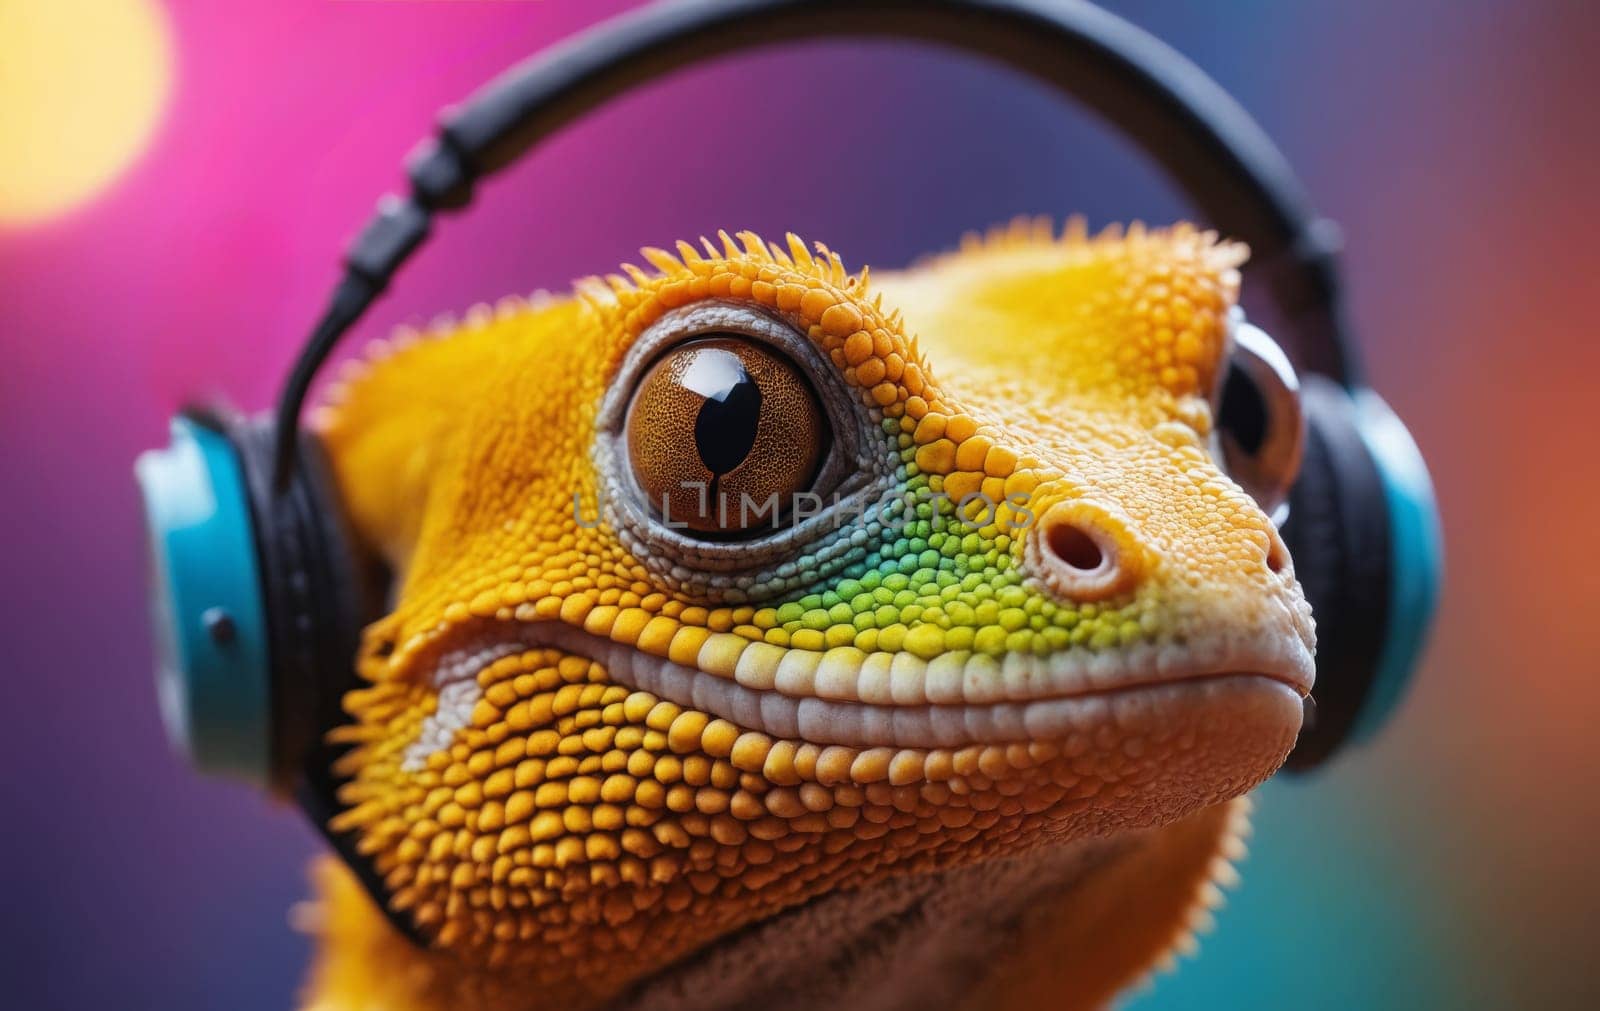 A scaled reptile, known as a lizard, is wearing headphones and smiling in a closeup photo capturing its terrestrial features through macro photography